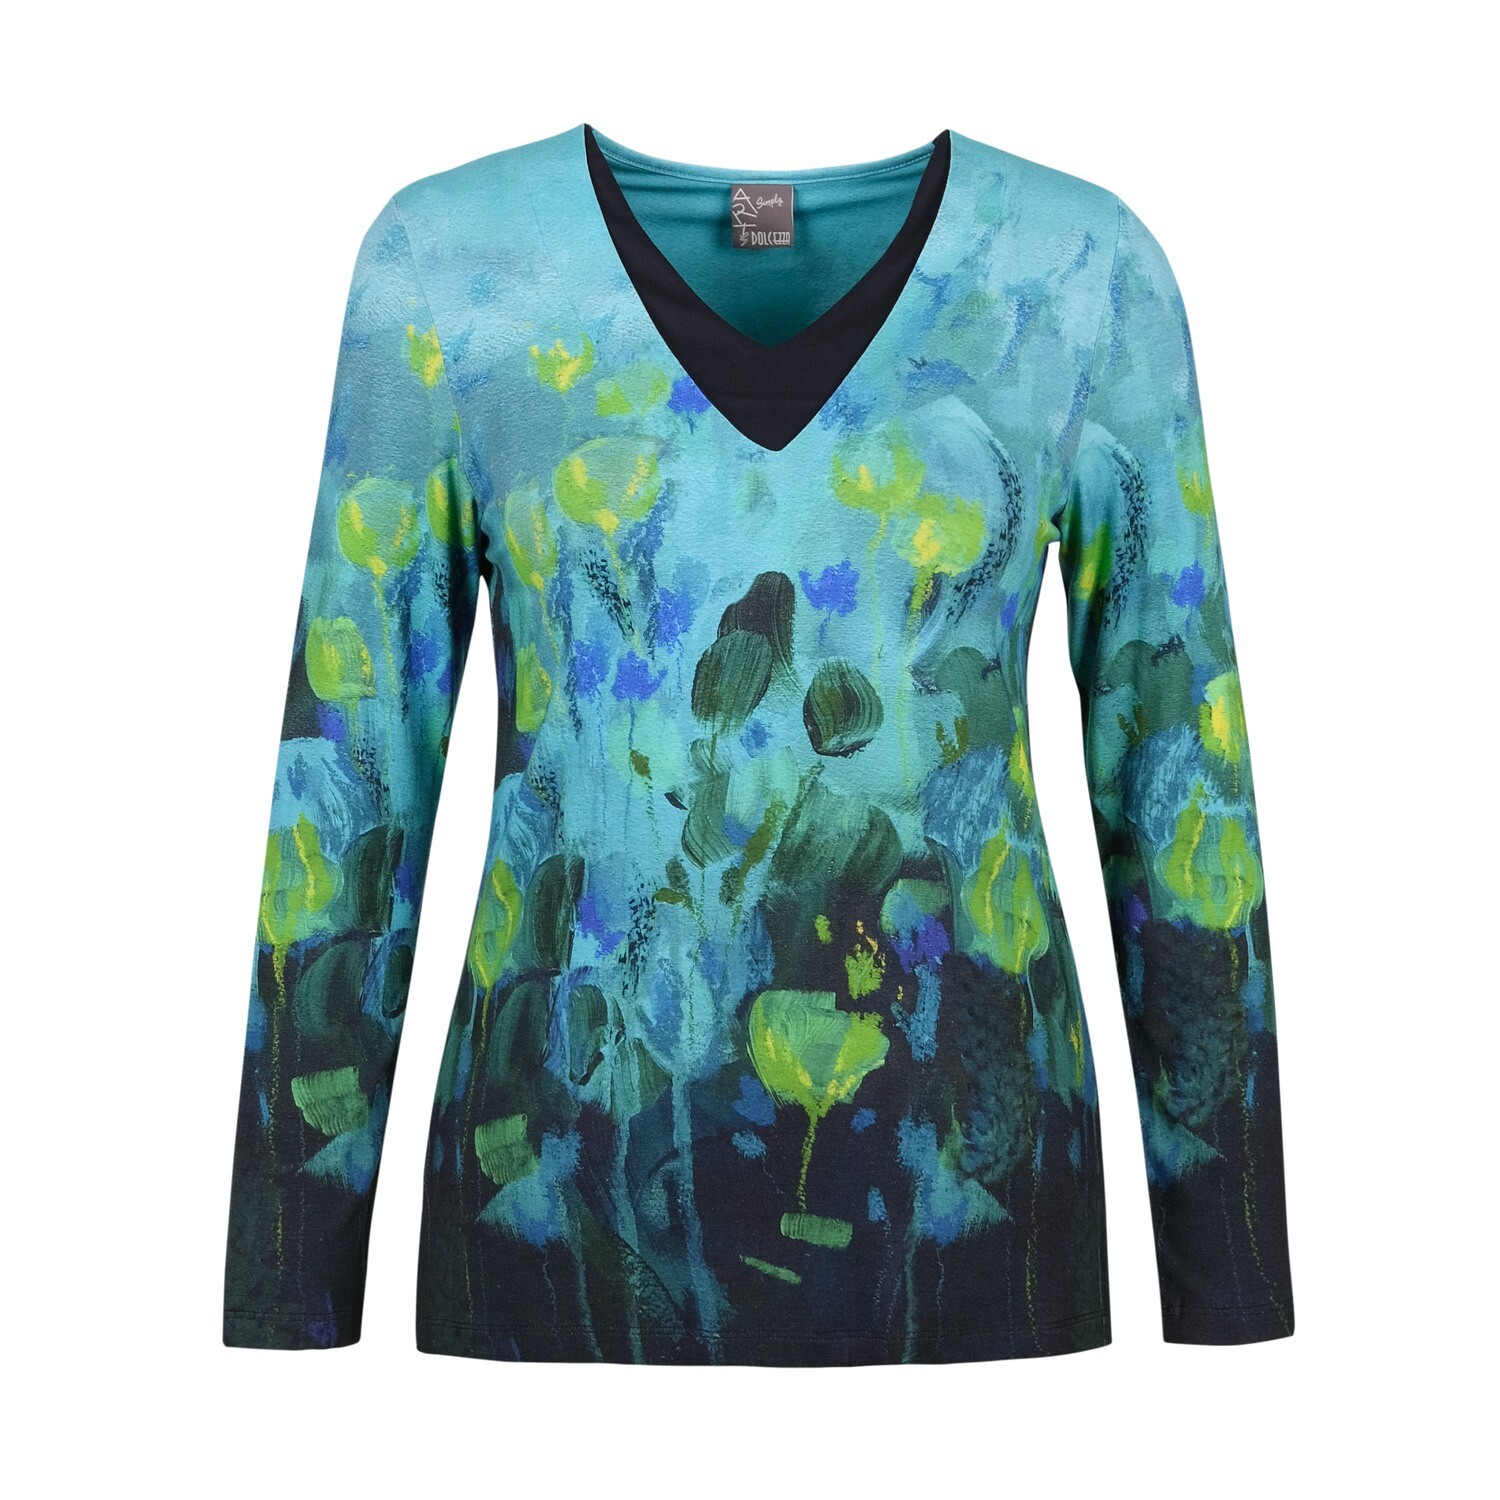 Simply Art Dolcezza: Fantaisie Floralge Abstract Art T-Shirt SOLD OUT